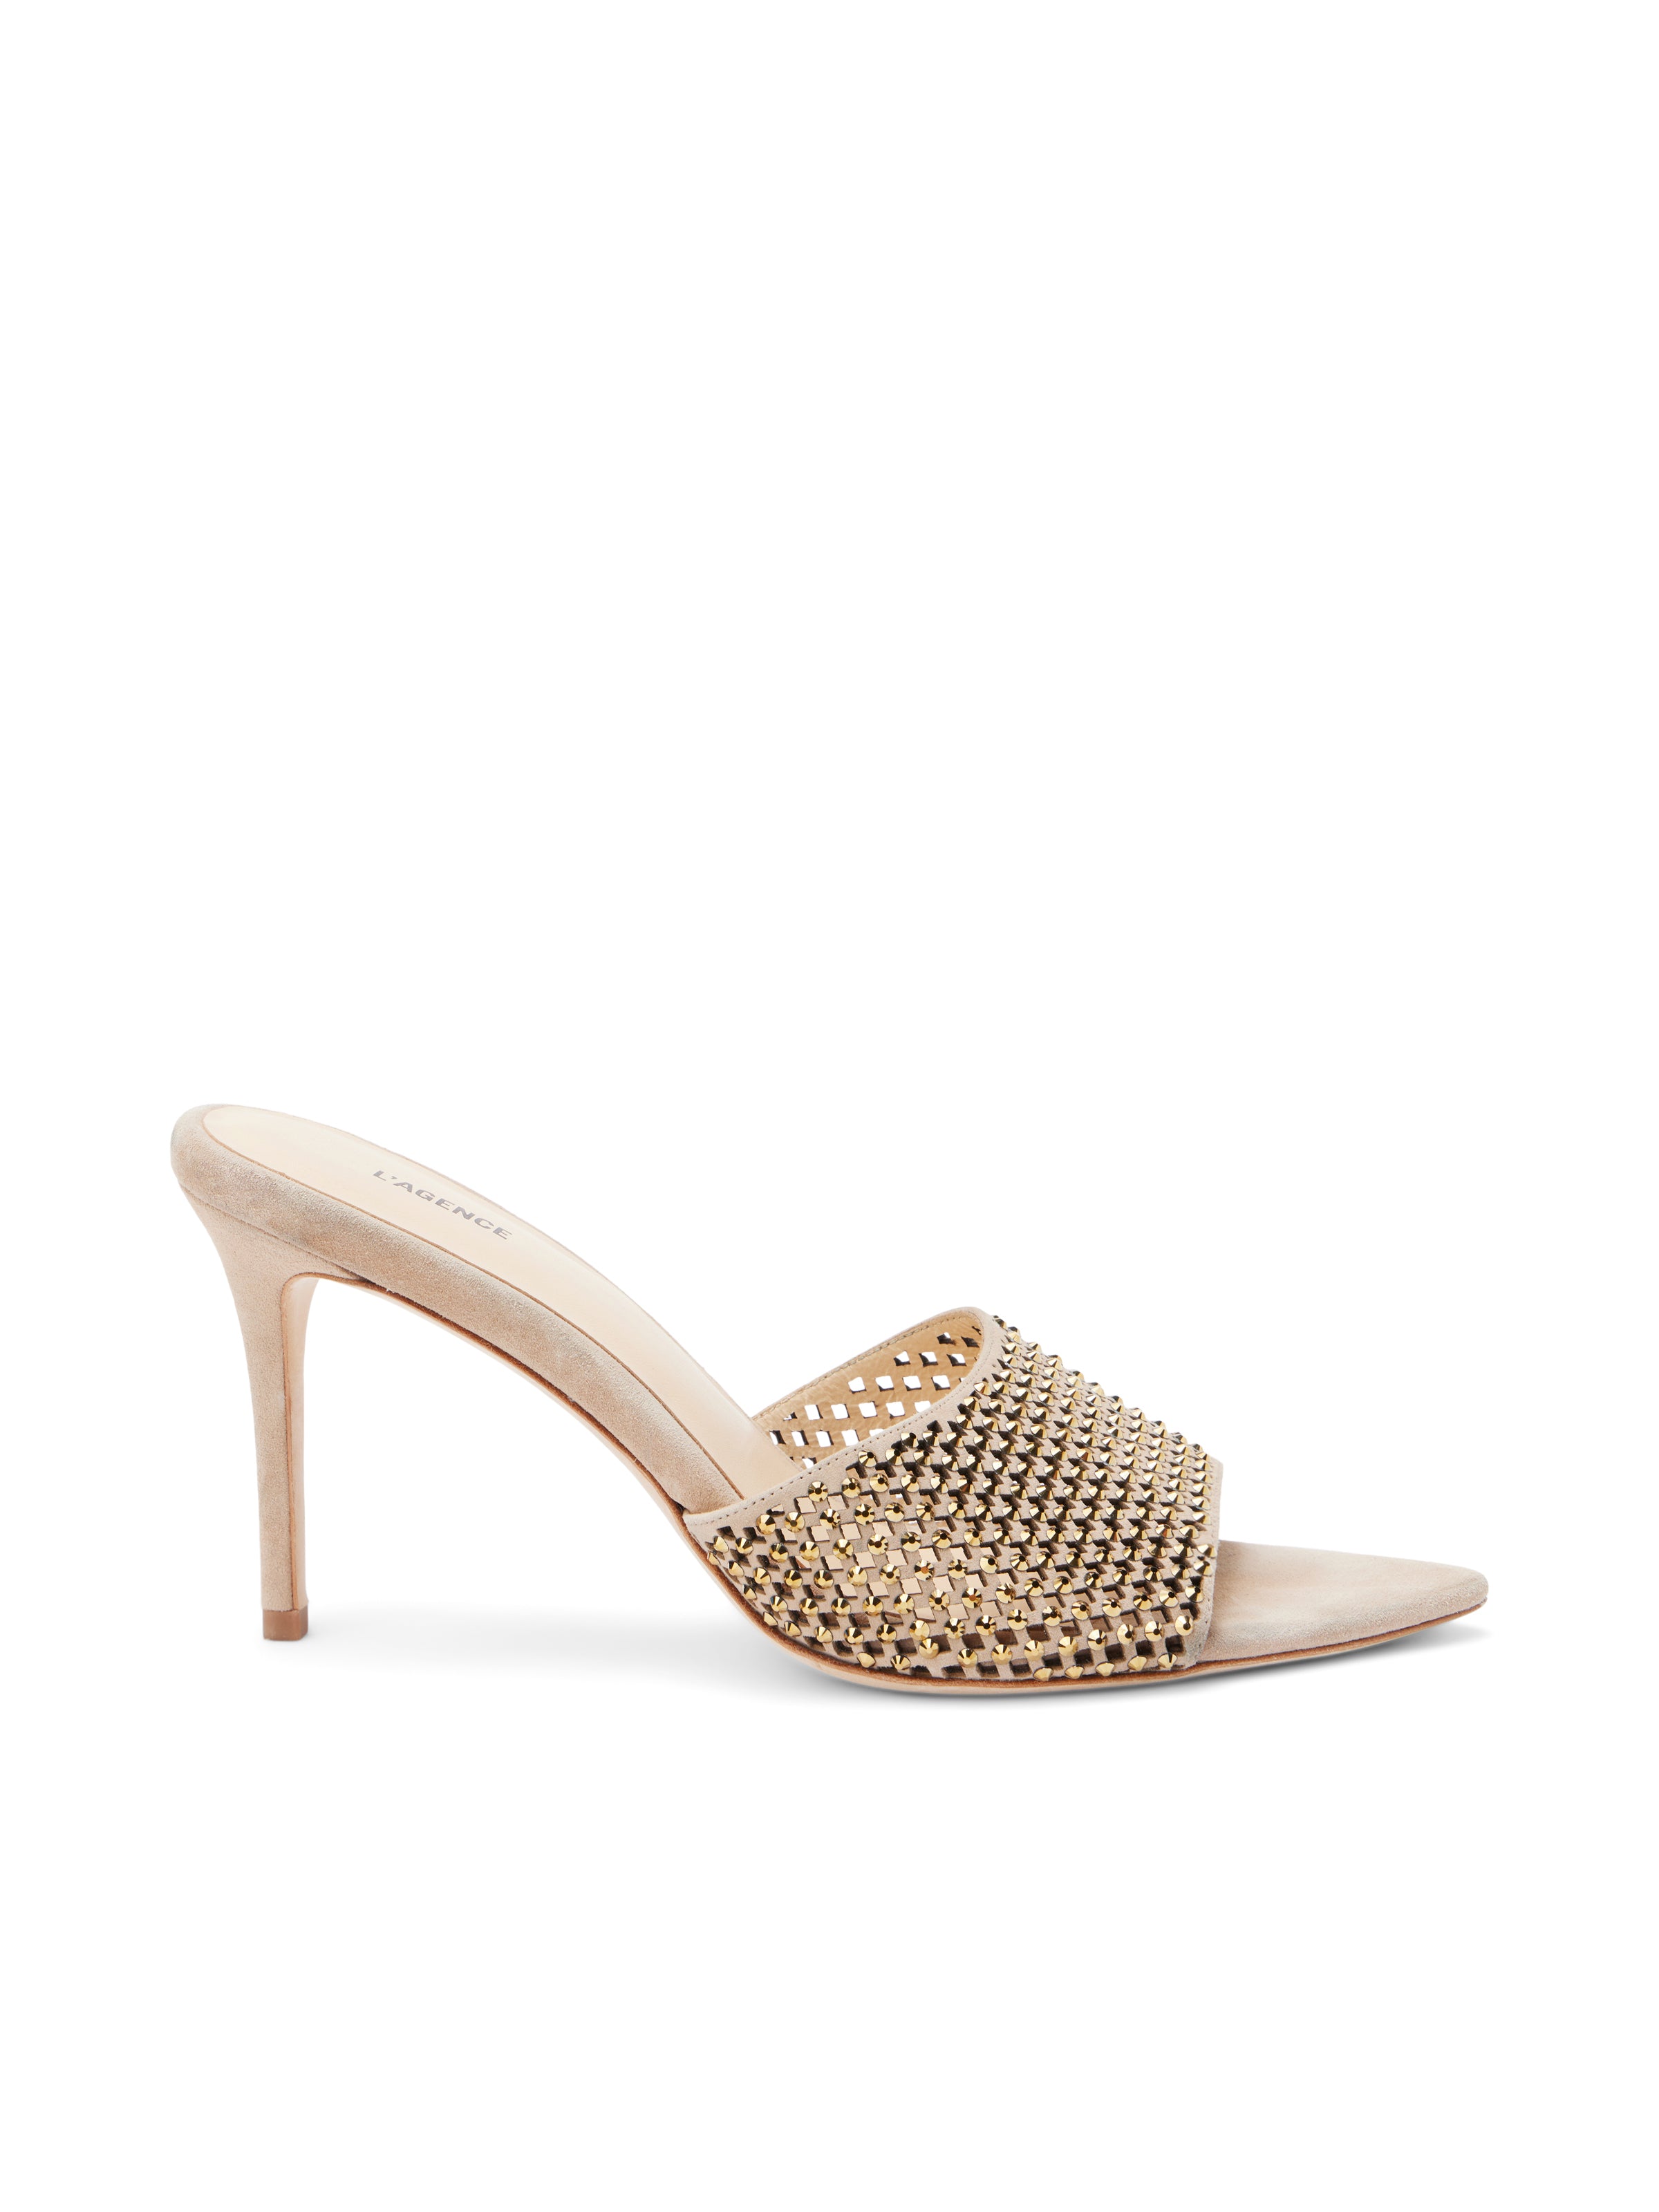 L'AGENCE Narcise Open Toe Mule in Macaroon Suede